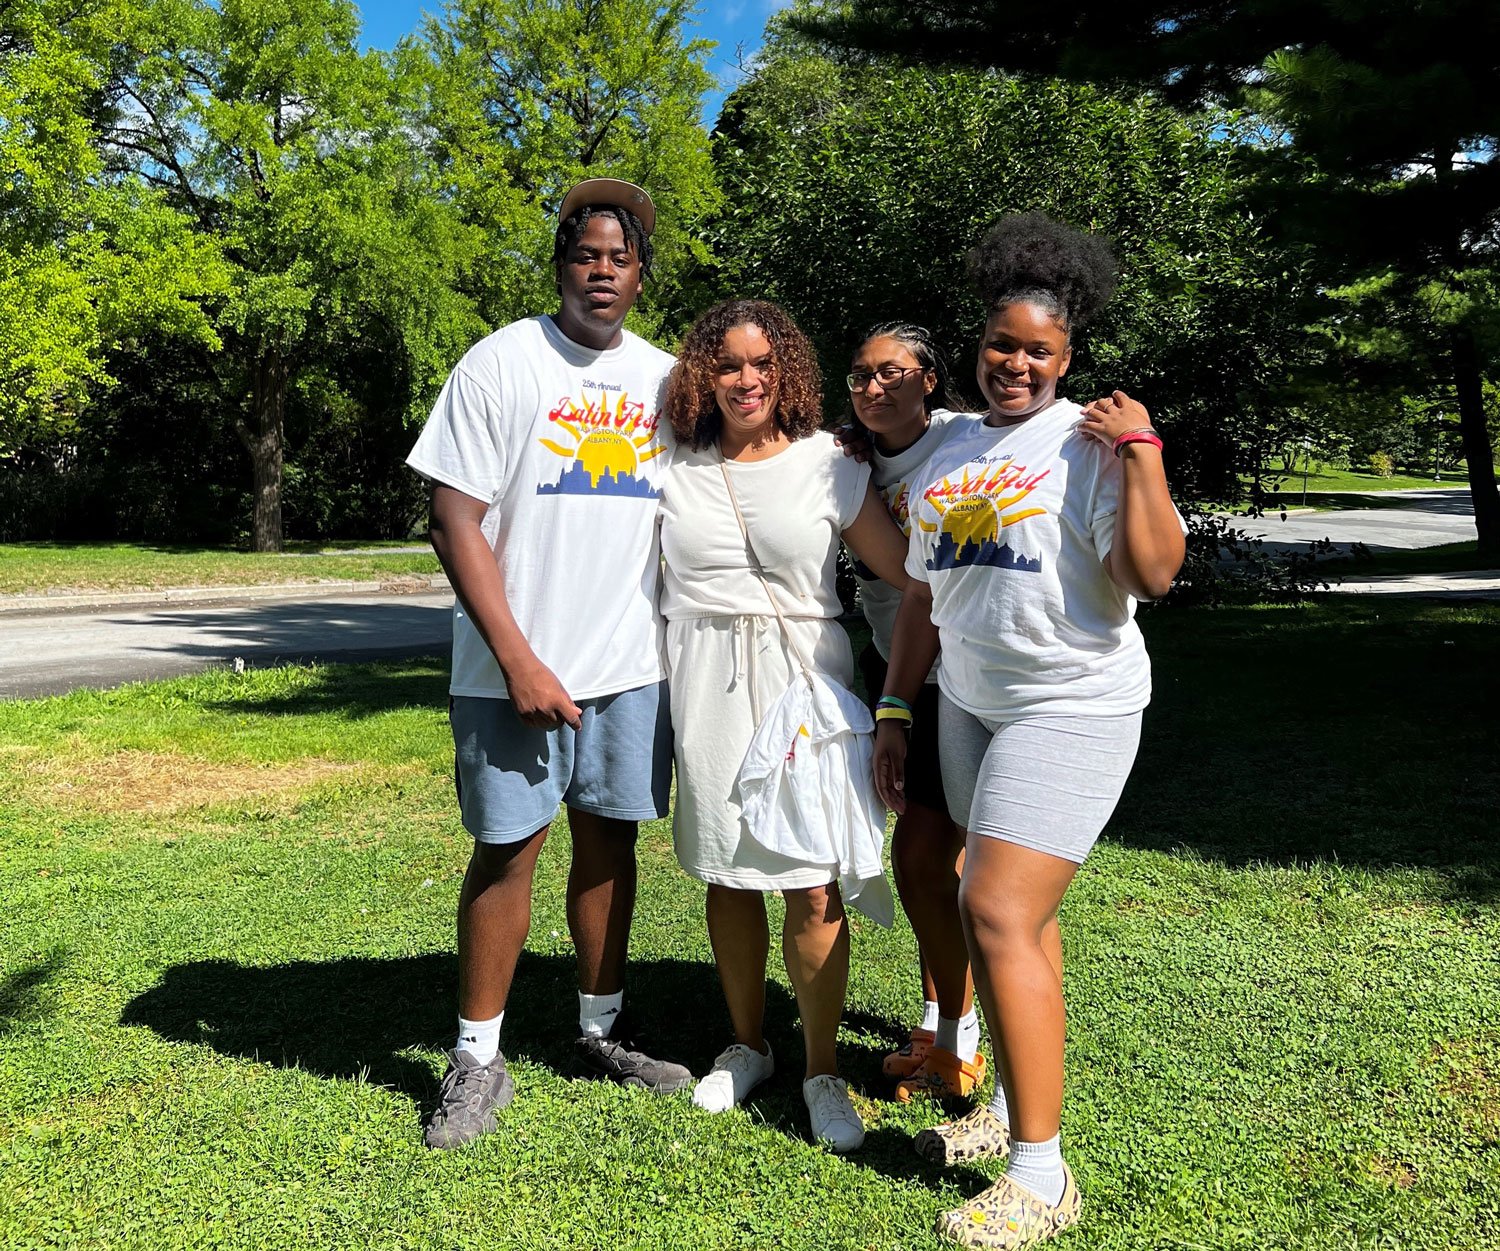 Three students wearing white 2022 LatinFest t-shirts pose with a woman in a white dress.